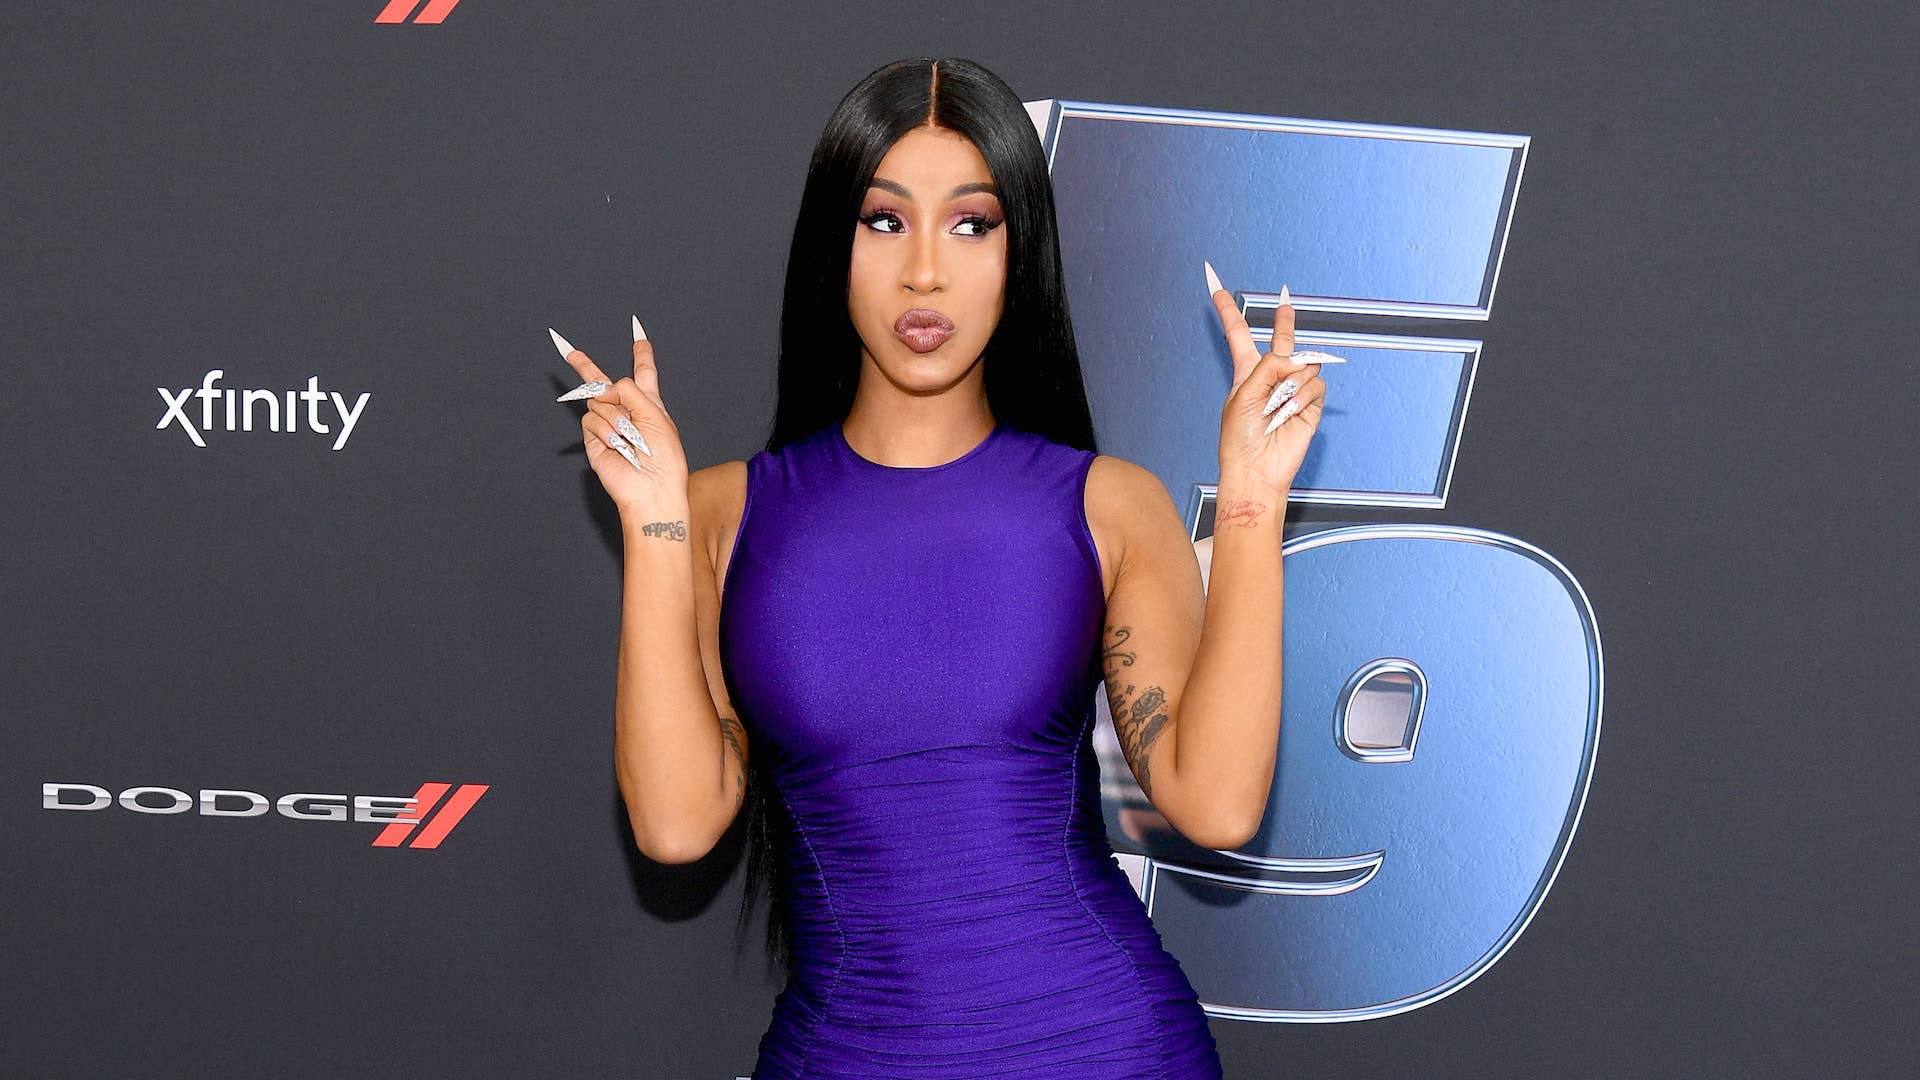 Cardi B attends "The Road to F9" Global Fan Extravaganza